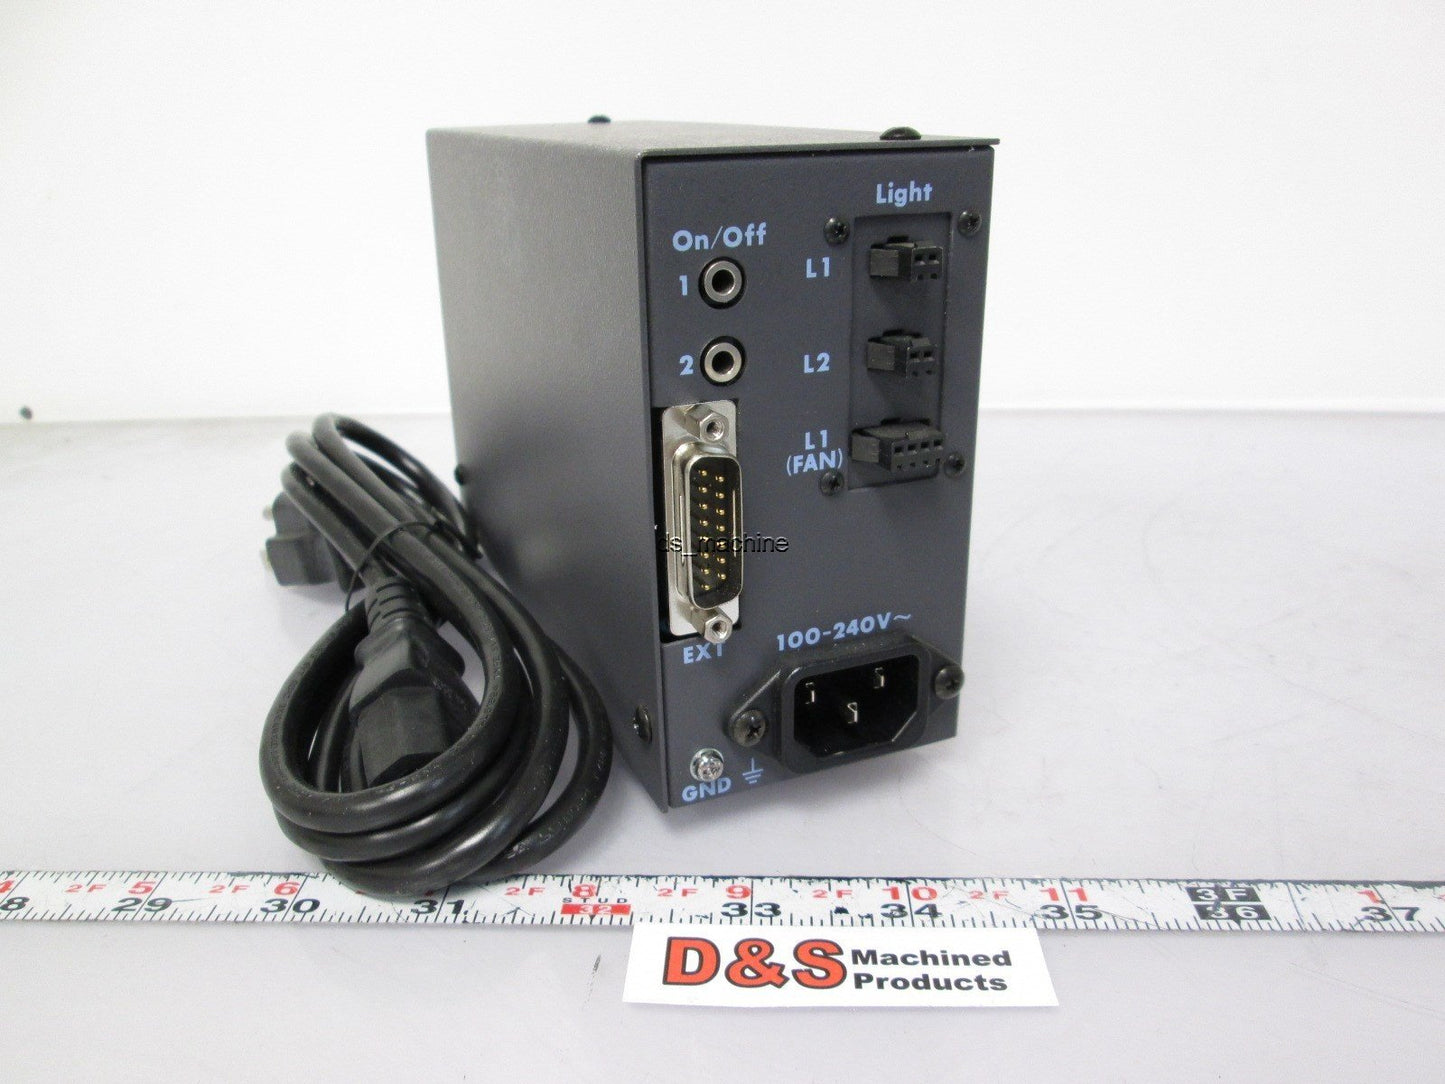 Used CCS PD-3012-2 LED Light Controller 2 Channel 120-240VAC w/Remote Option